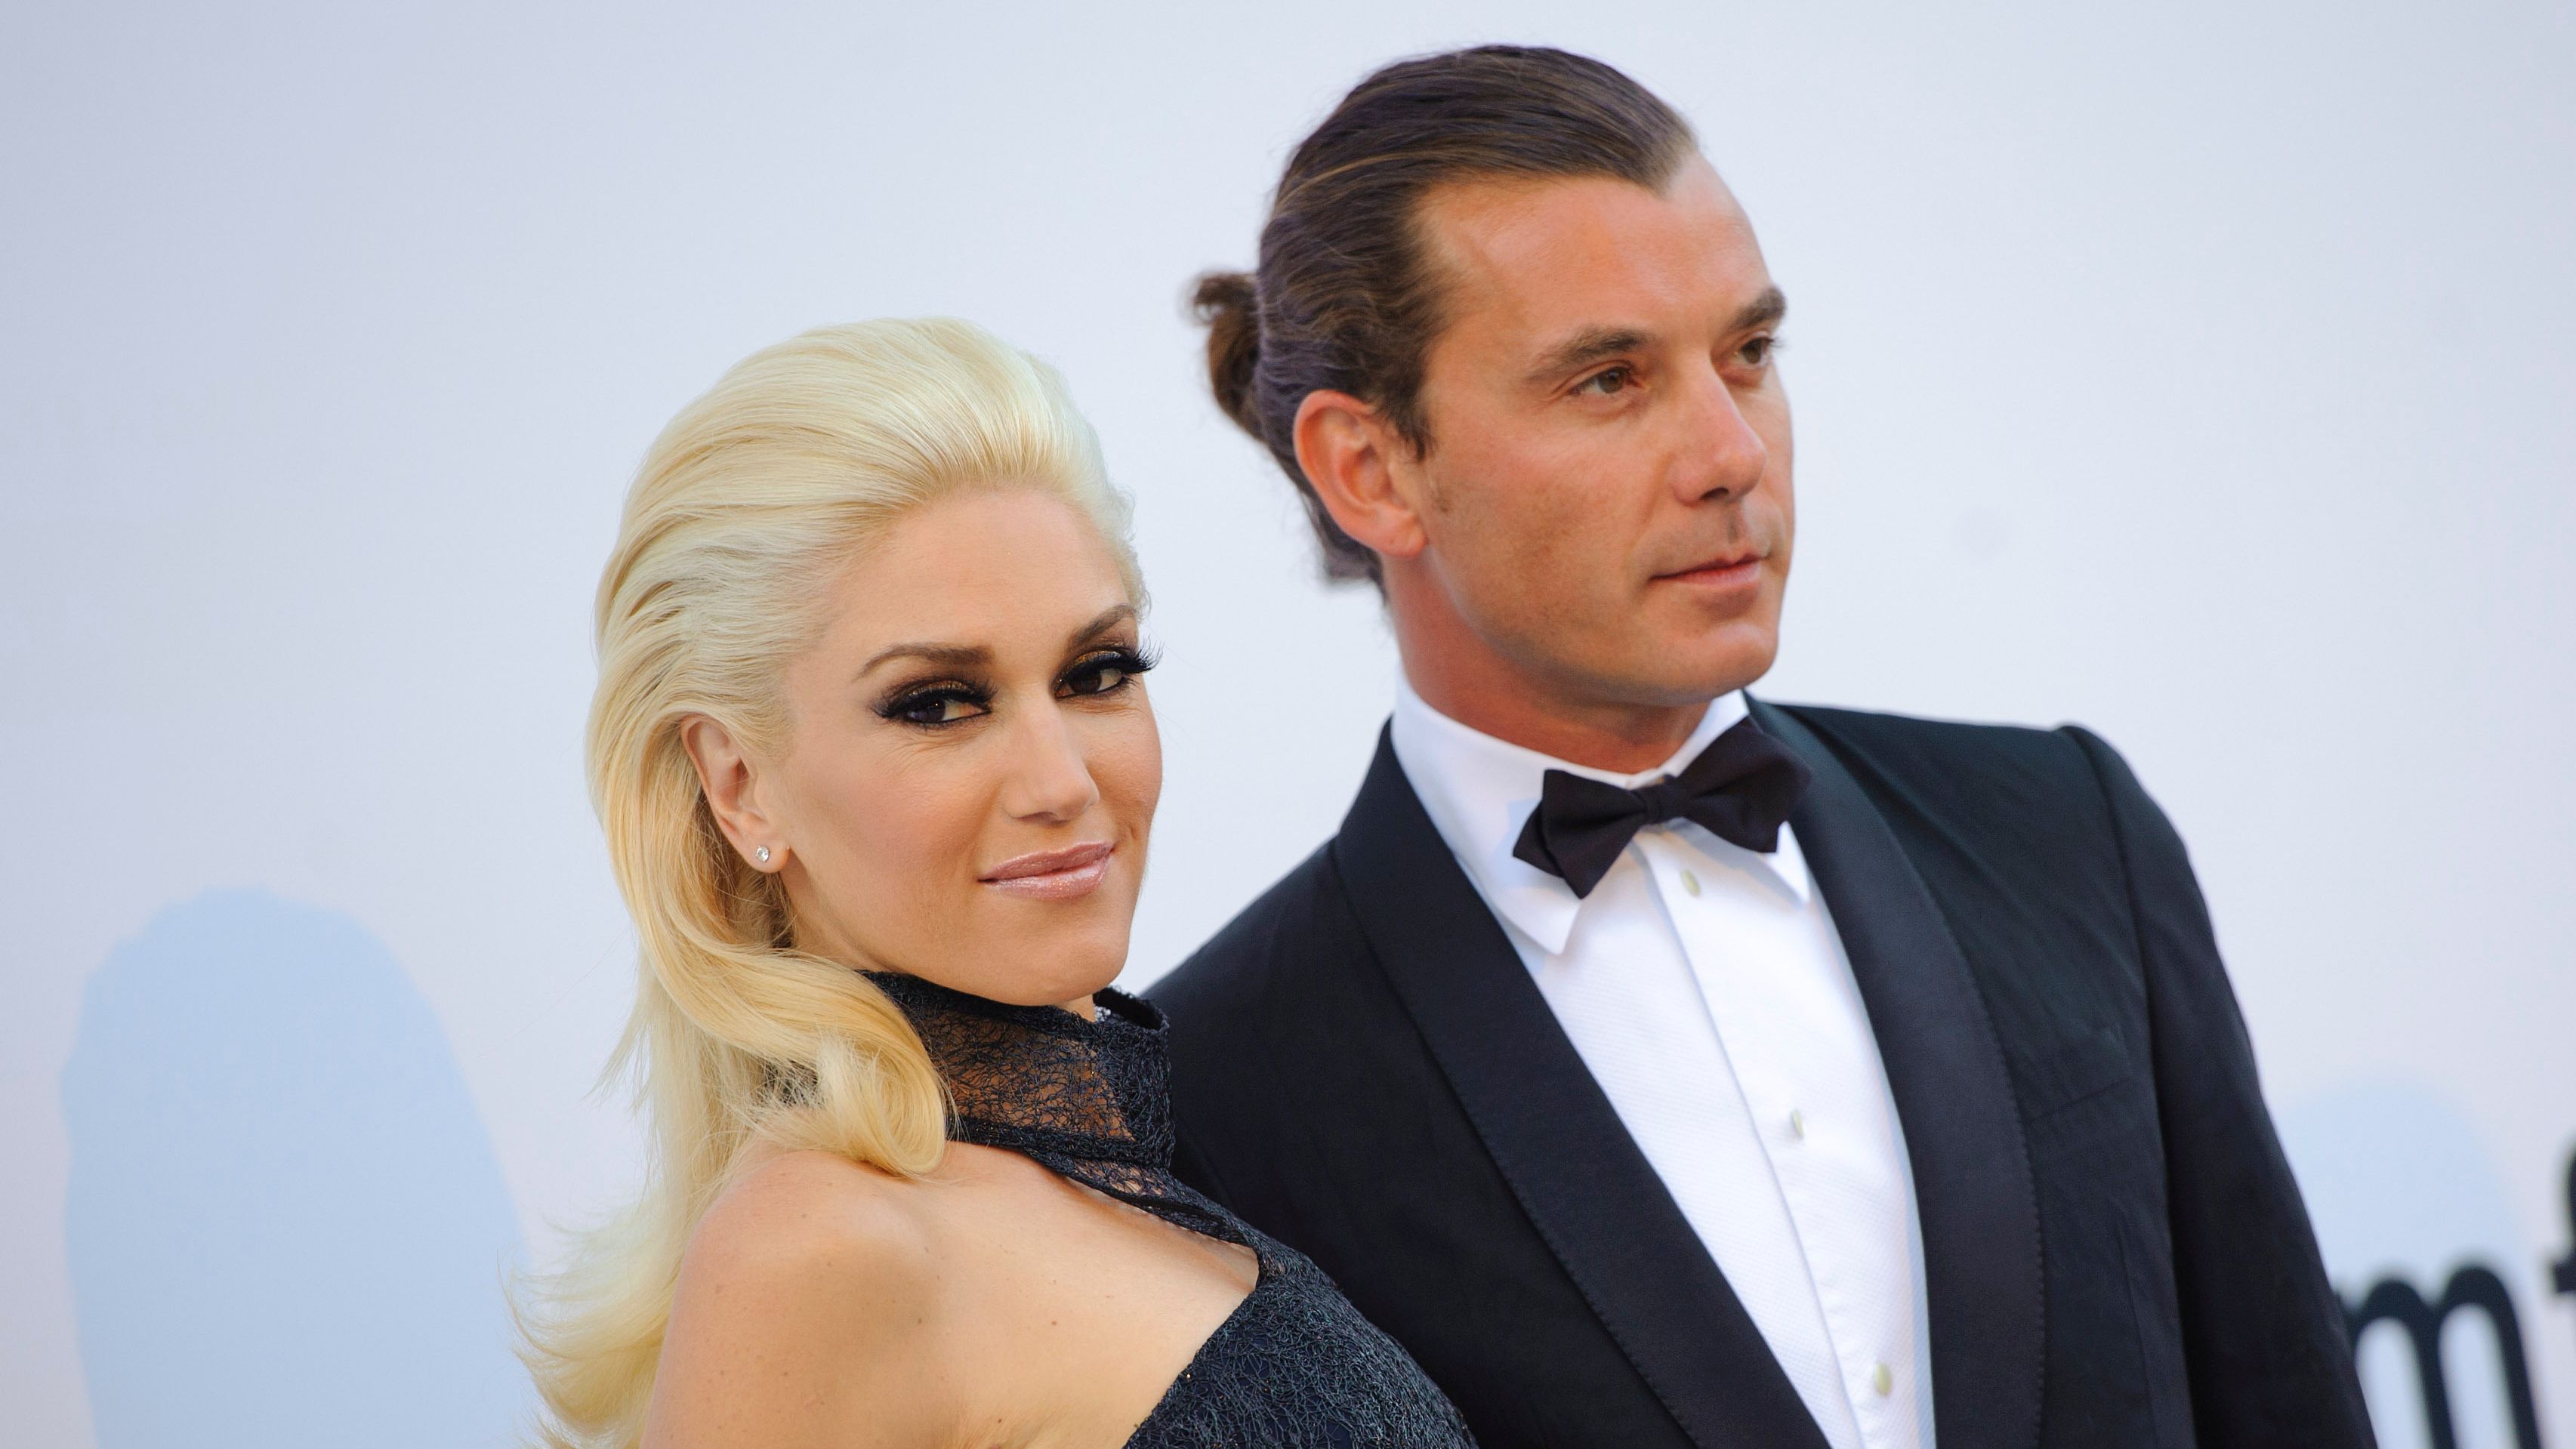 Did Gwen Stefani's husband cheat on her with a look-a-like nanny ...